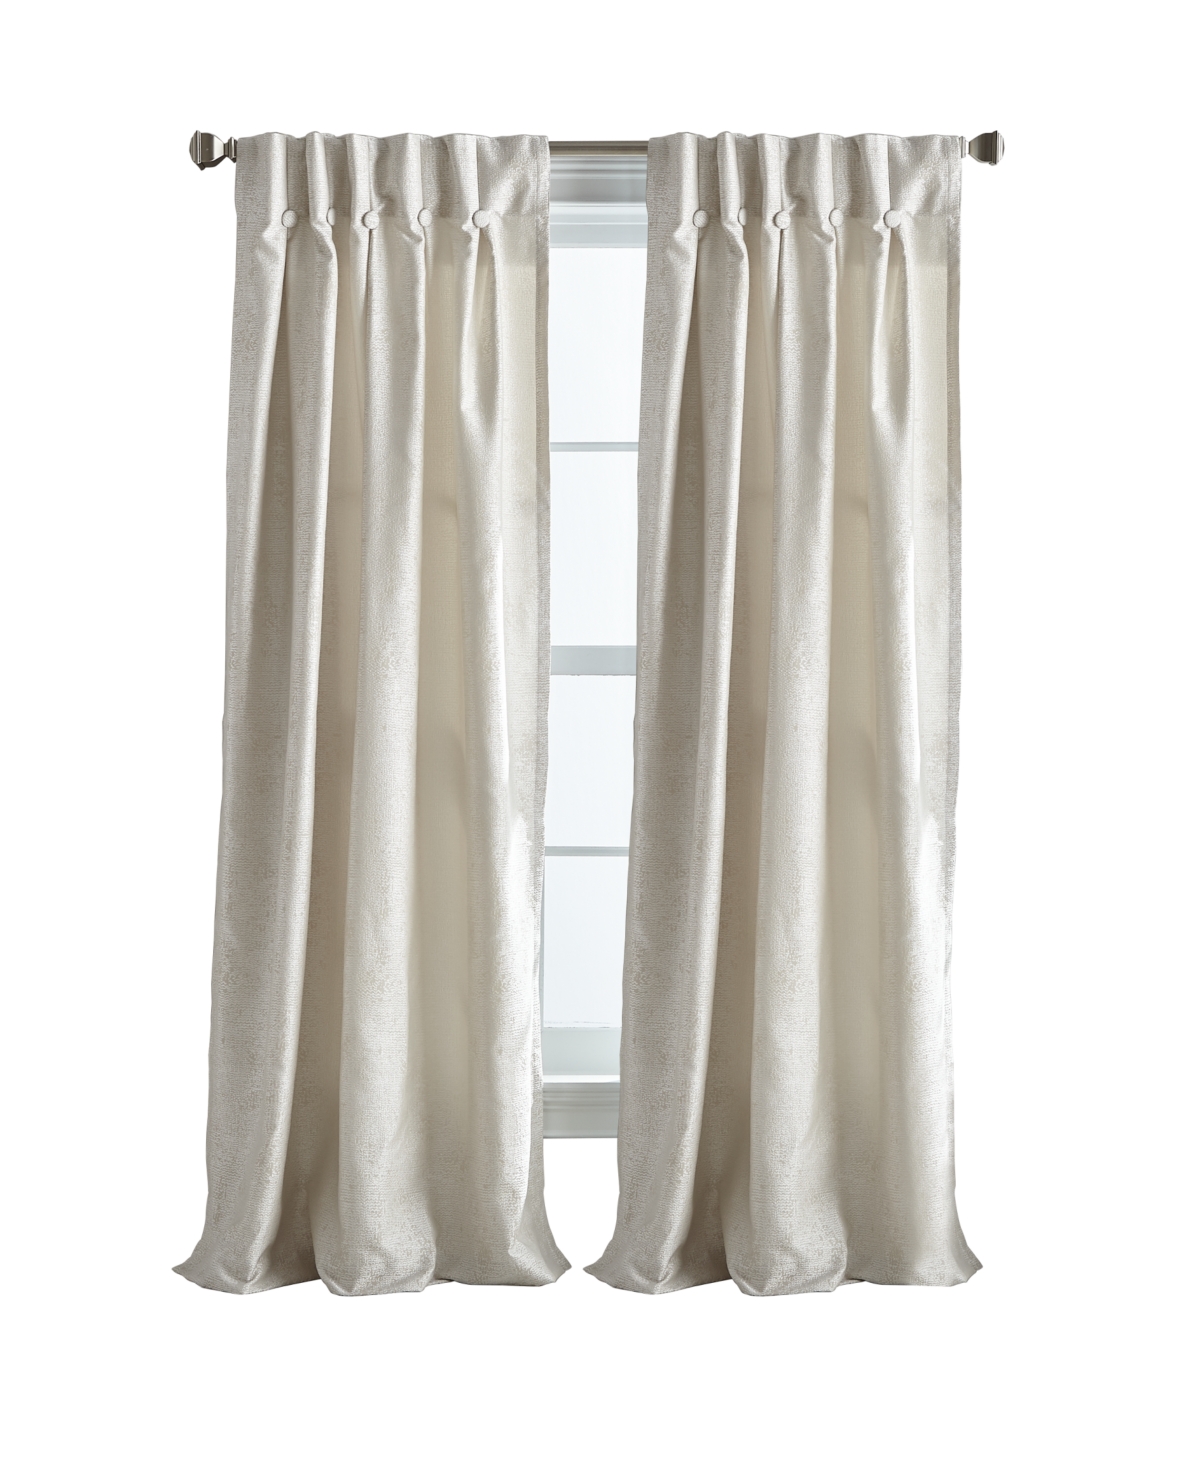 Dkny Plaza Light Filtering Inverted Pleat With Button Lined 2 Piece Window Panel, 96" X 32" In Champagne